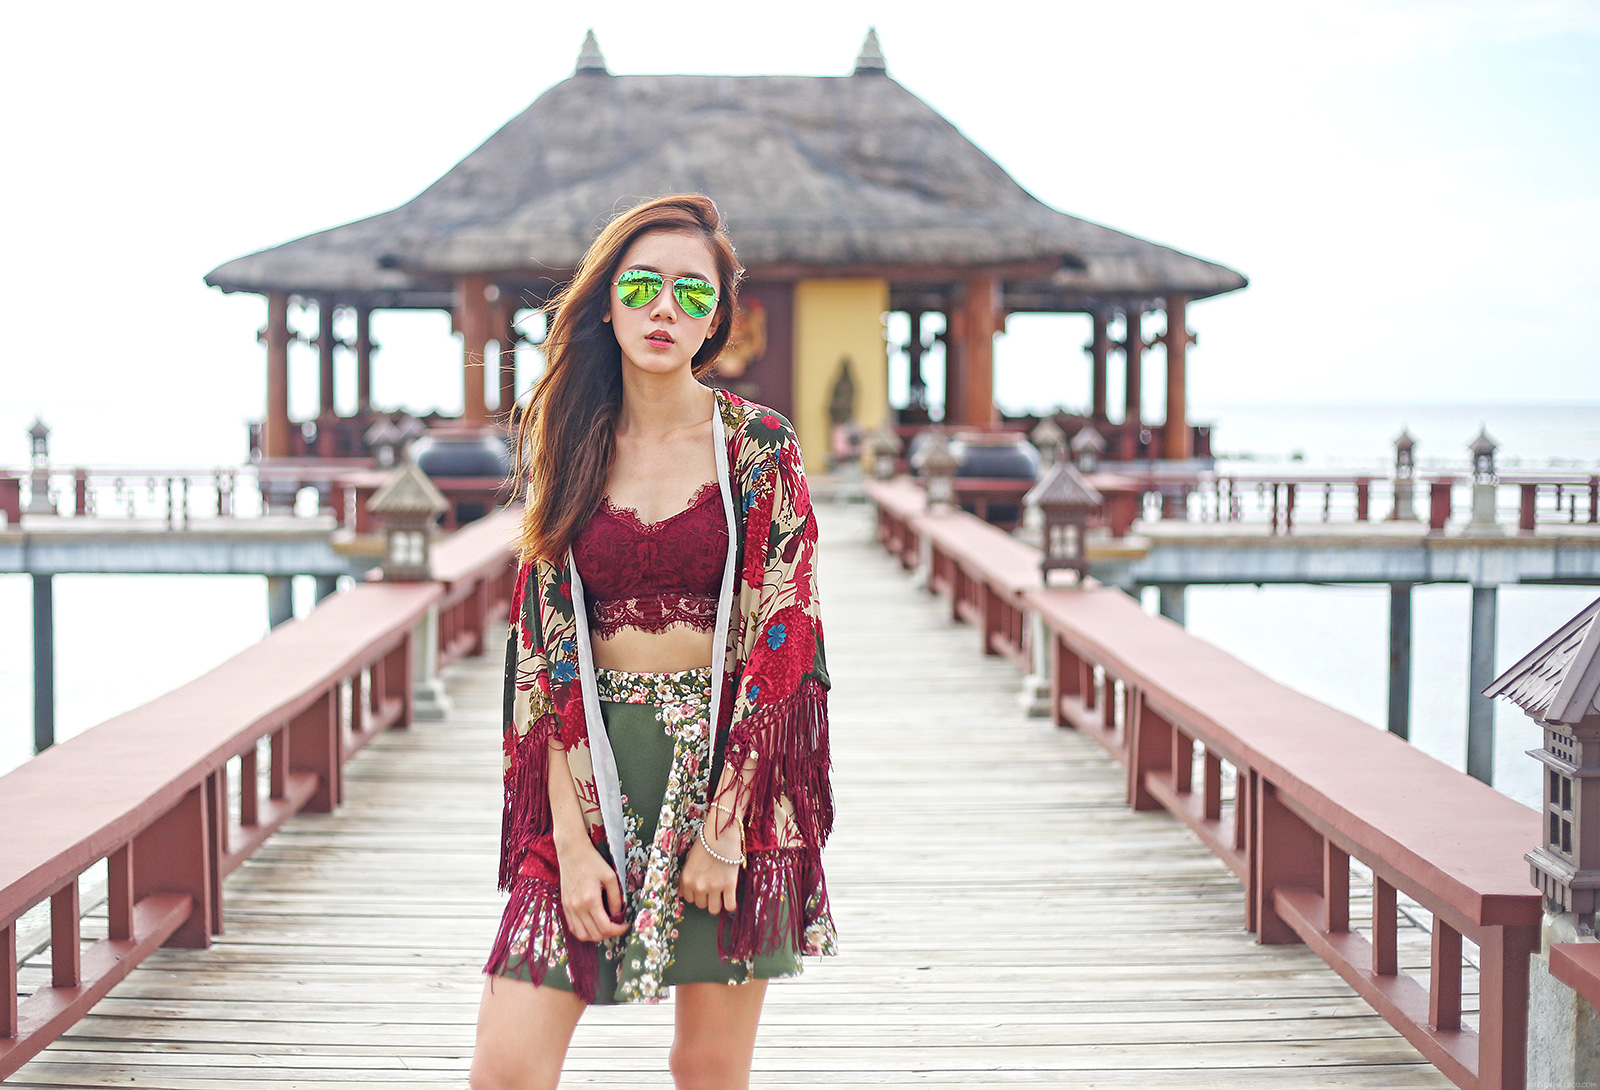 Boho Chic in Oasap kimono, Topshop lace cropped top, Hong Kong floral skirt, Rayban sunglasses | www.itscamilleco.com